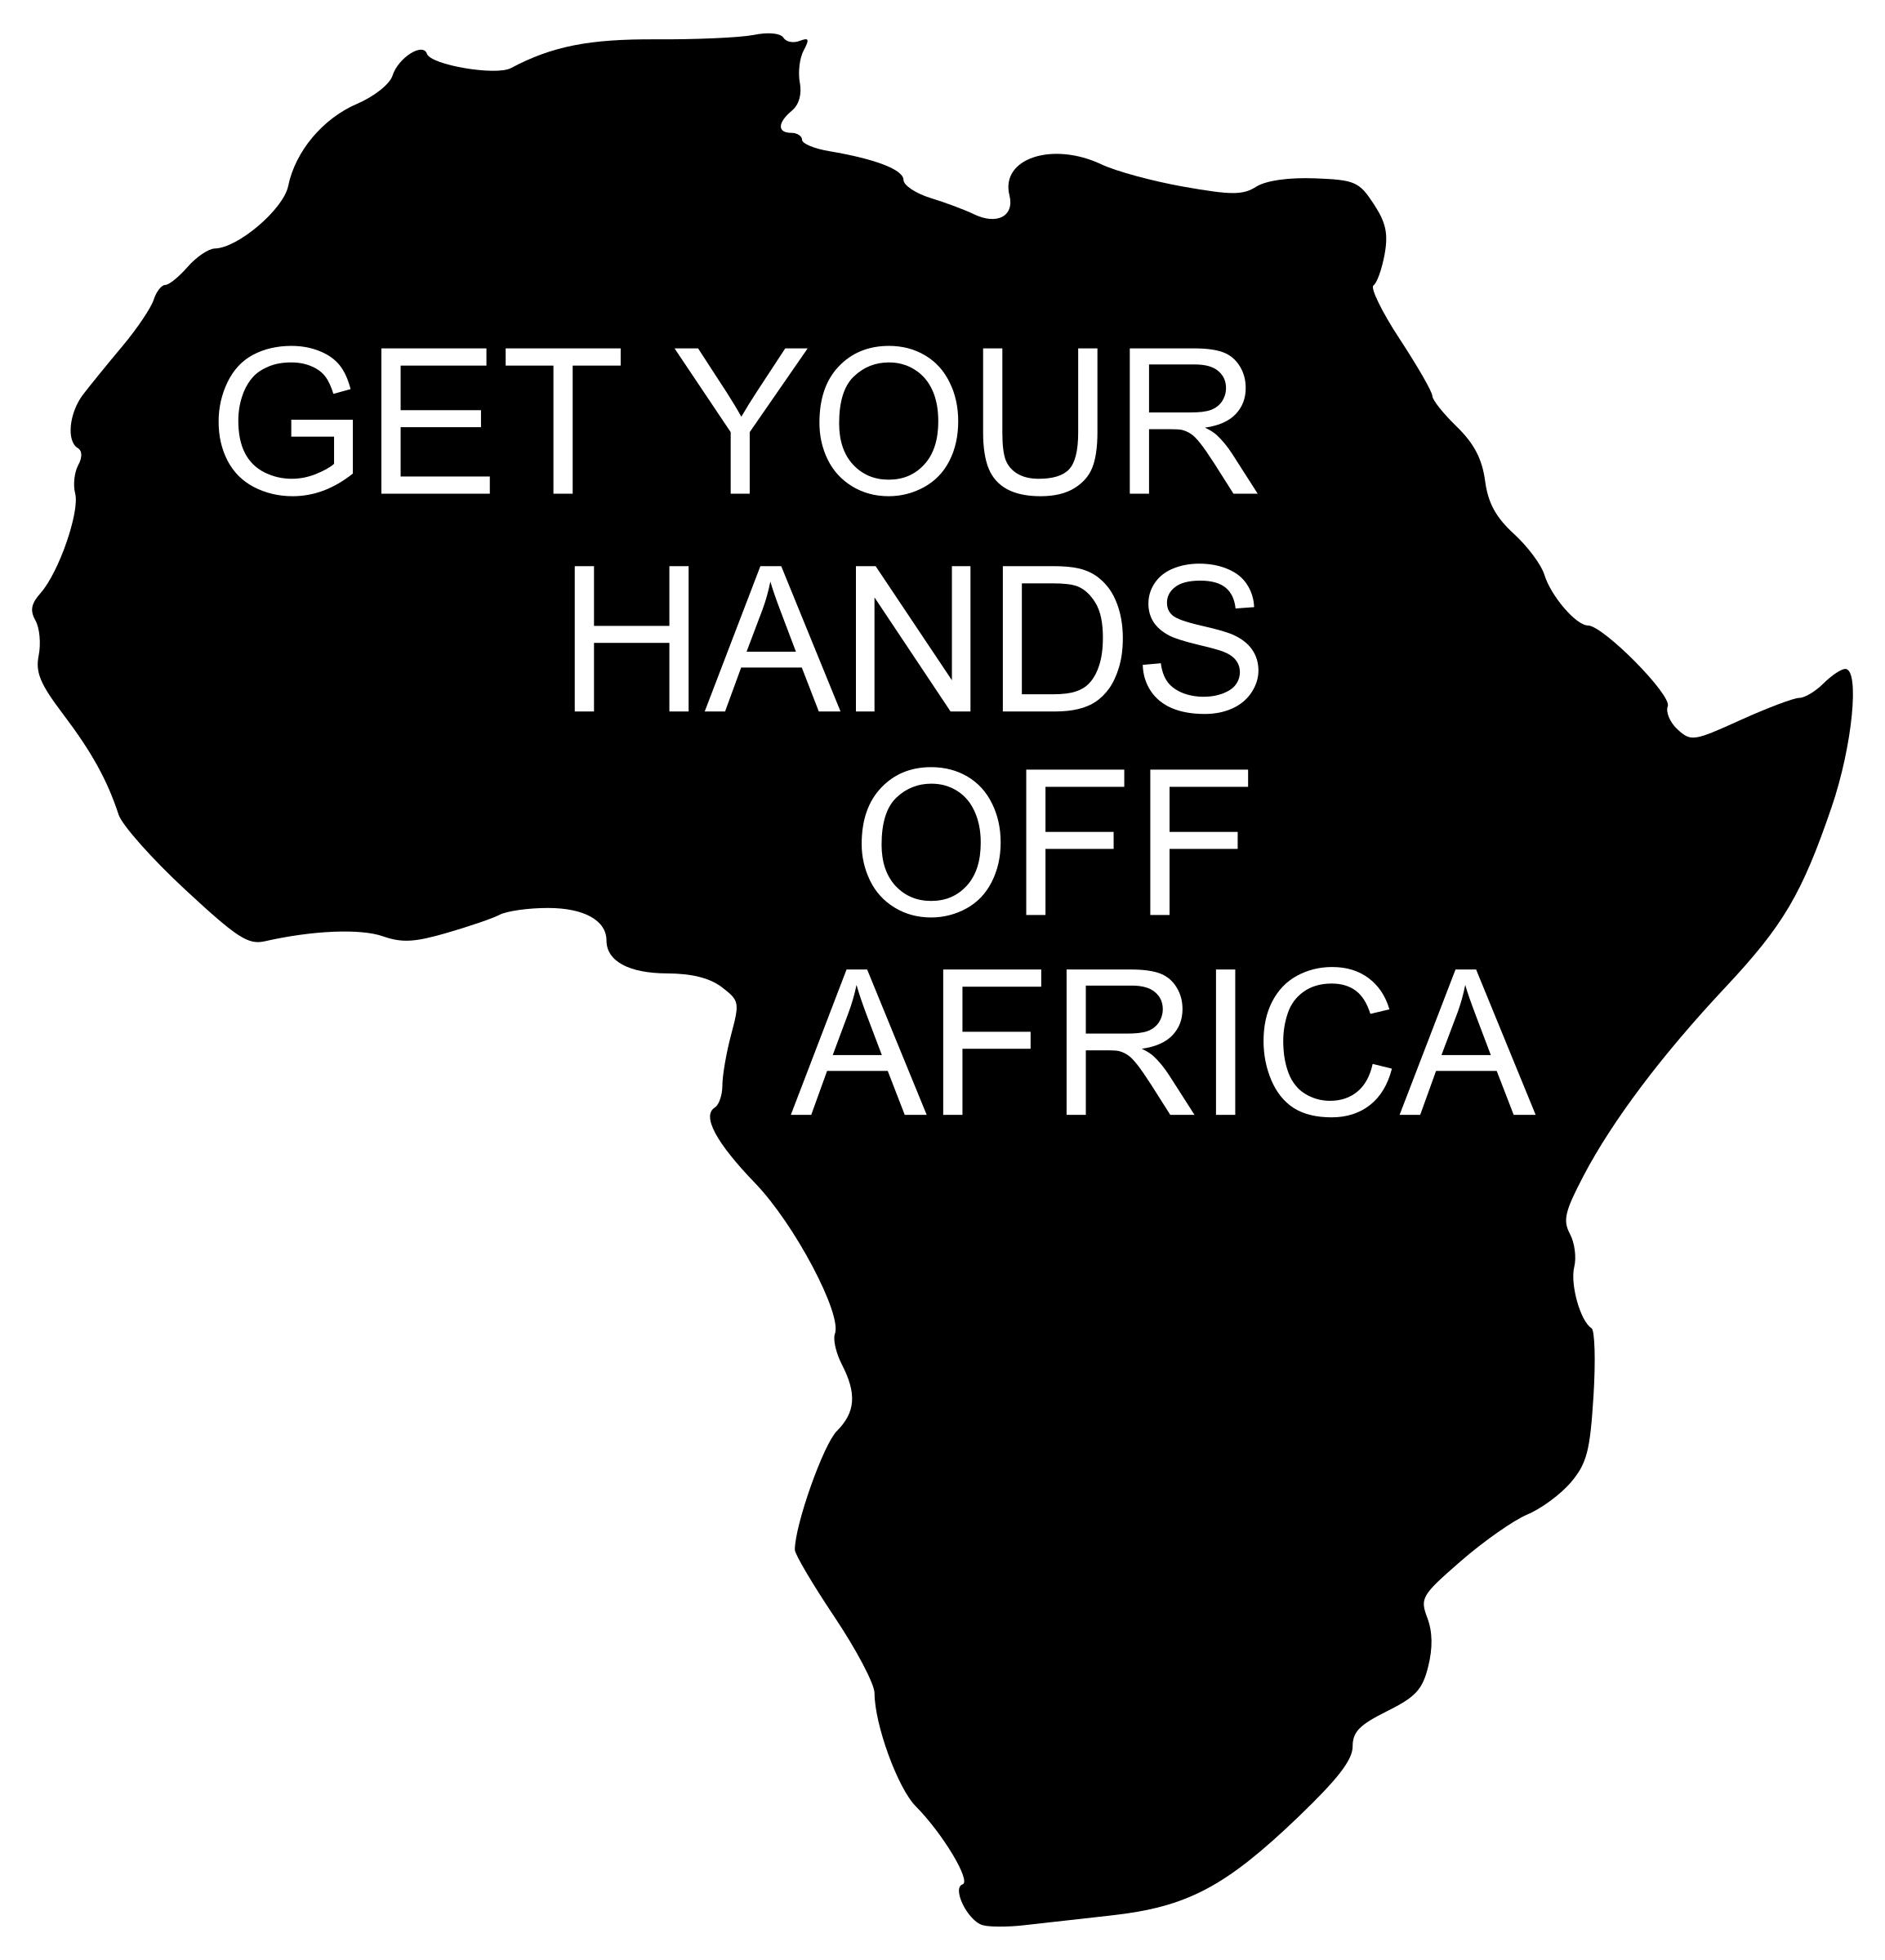 GET YOUR HANDS OFF AFRICA PNG icons